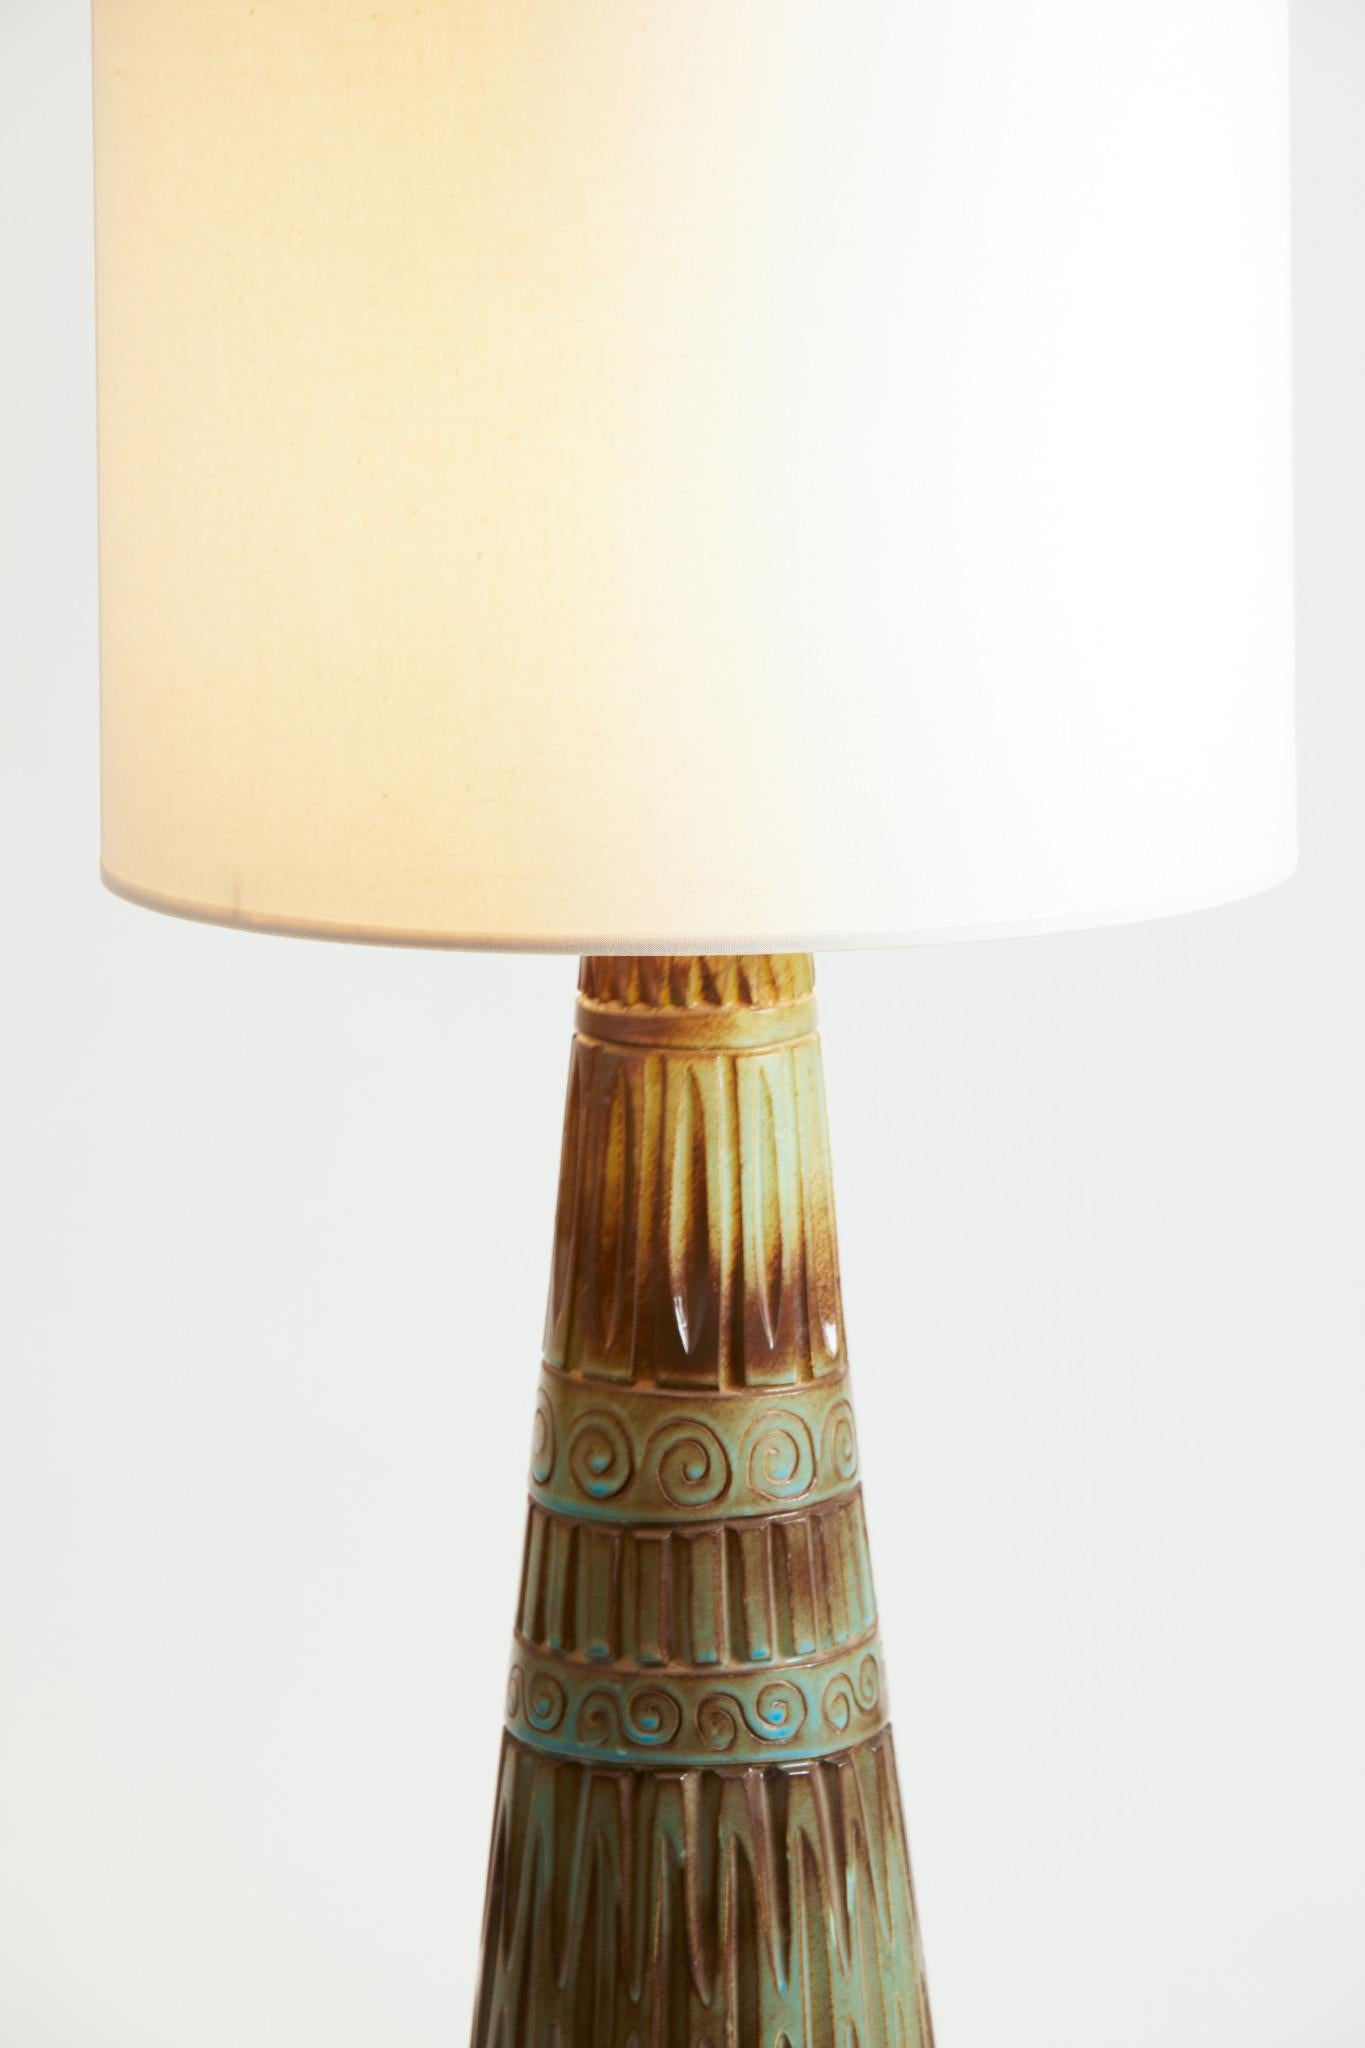 Marius Bessone from Vallauris signed pottery lamp with turquoise hue and patterns. Large scale.